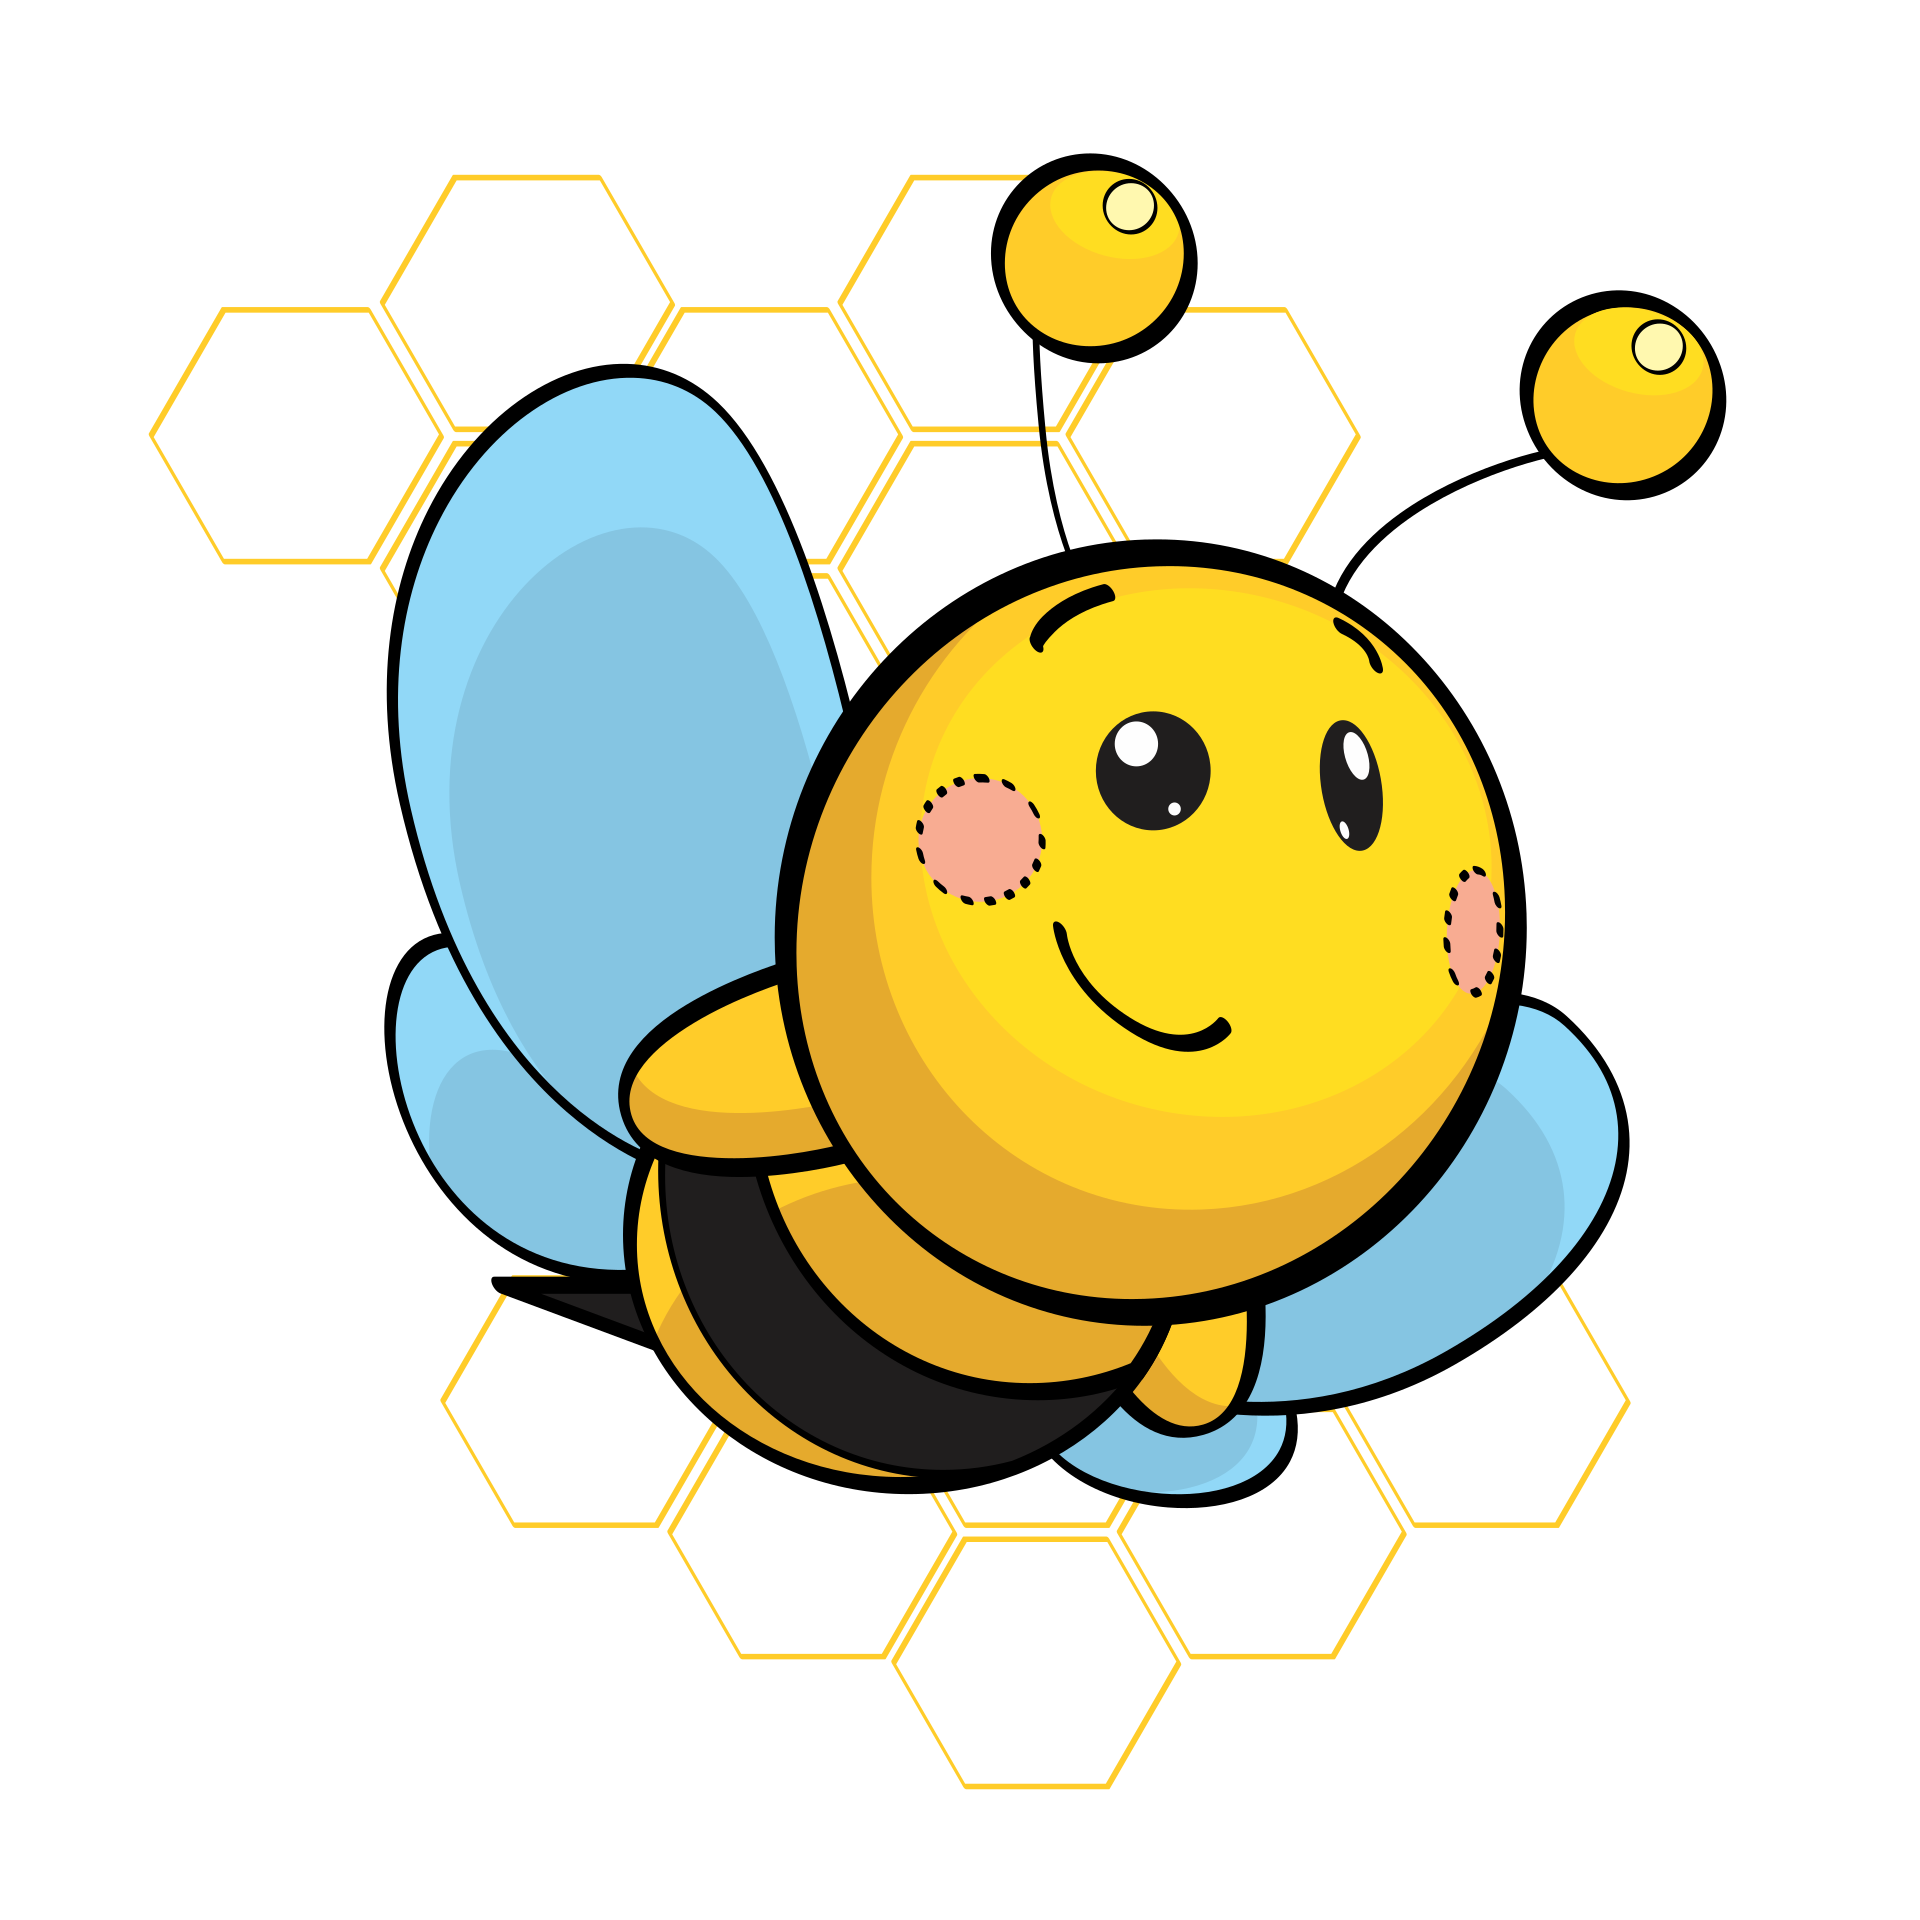 Illustration of a bumble bee with a honey comb background.